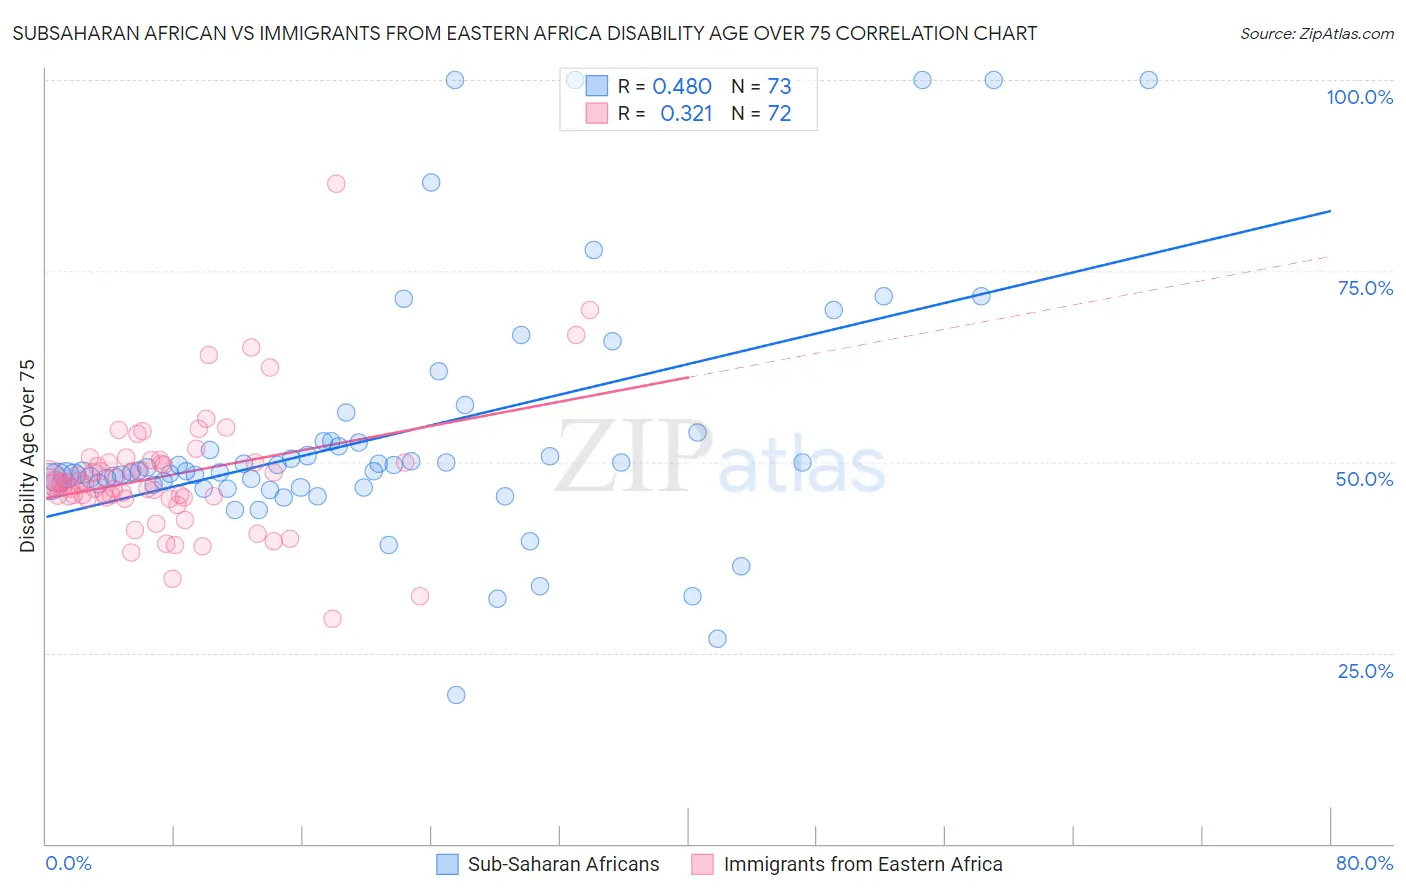 Subsaharan African vs Immigrants from Eastern Africa Disability Age Over 75